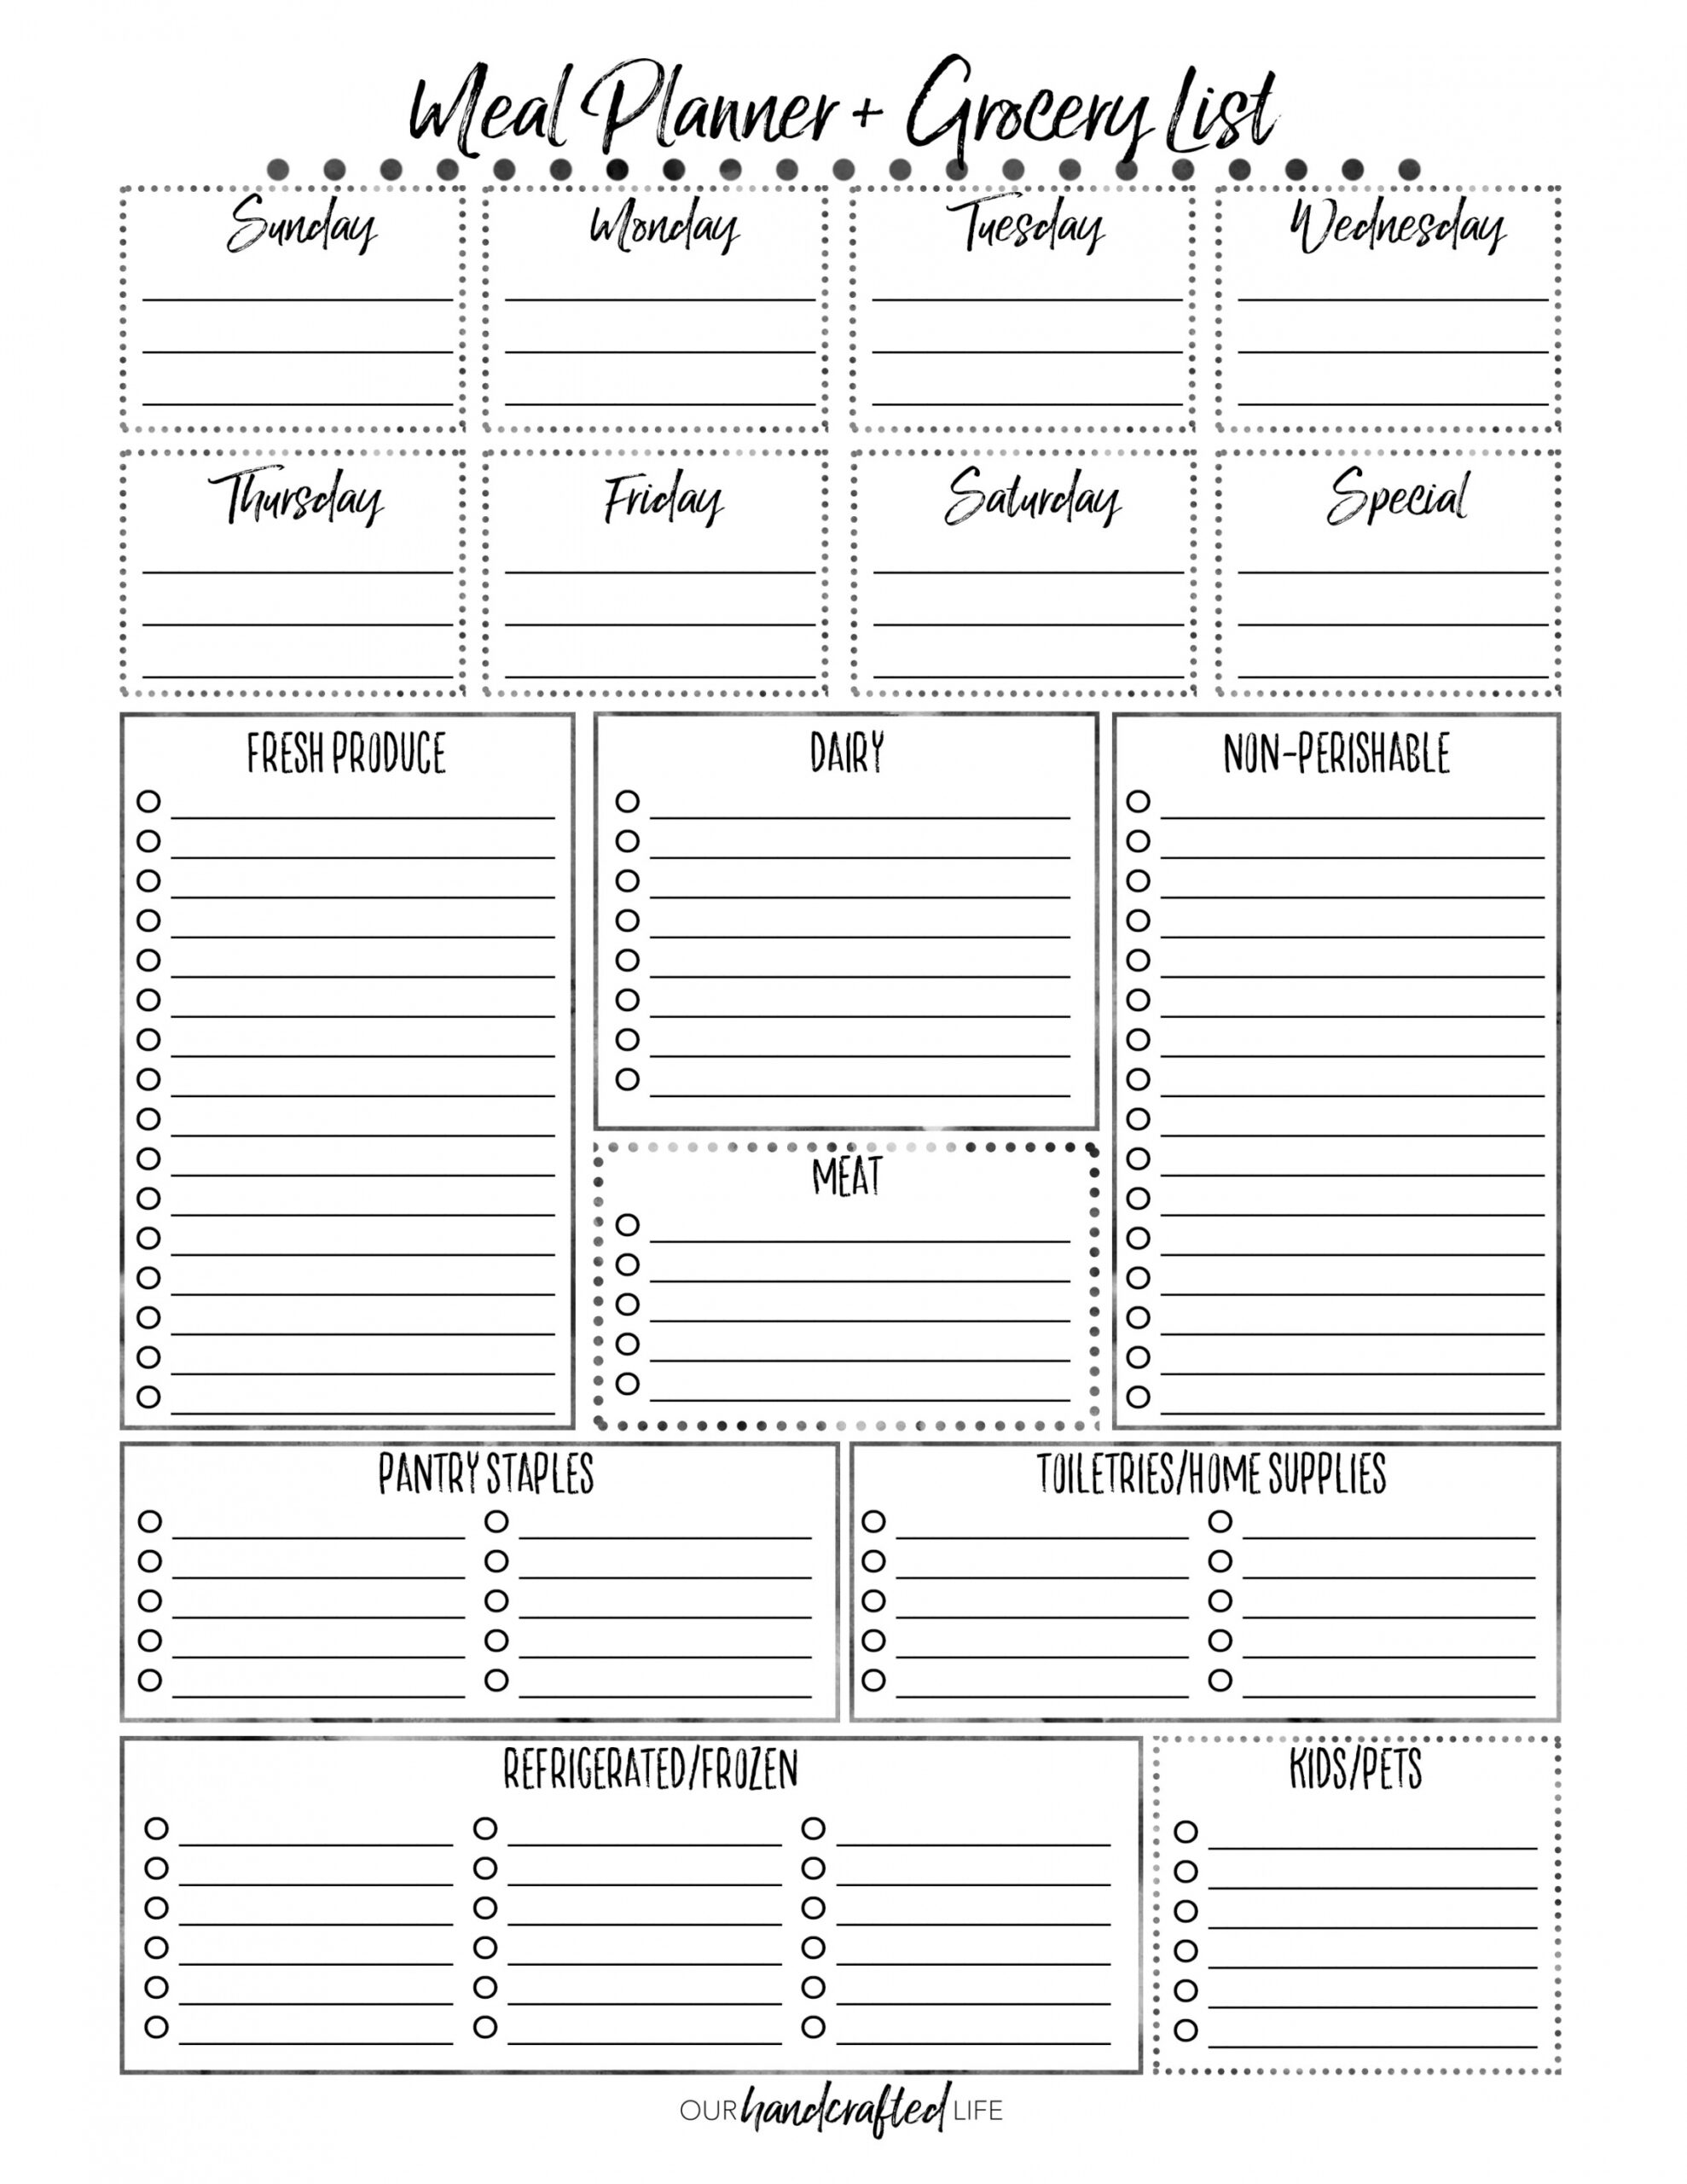 The Most Practical Meal Planner EVER - Our Handcrafted Life